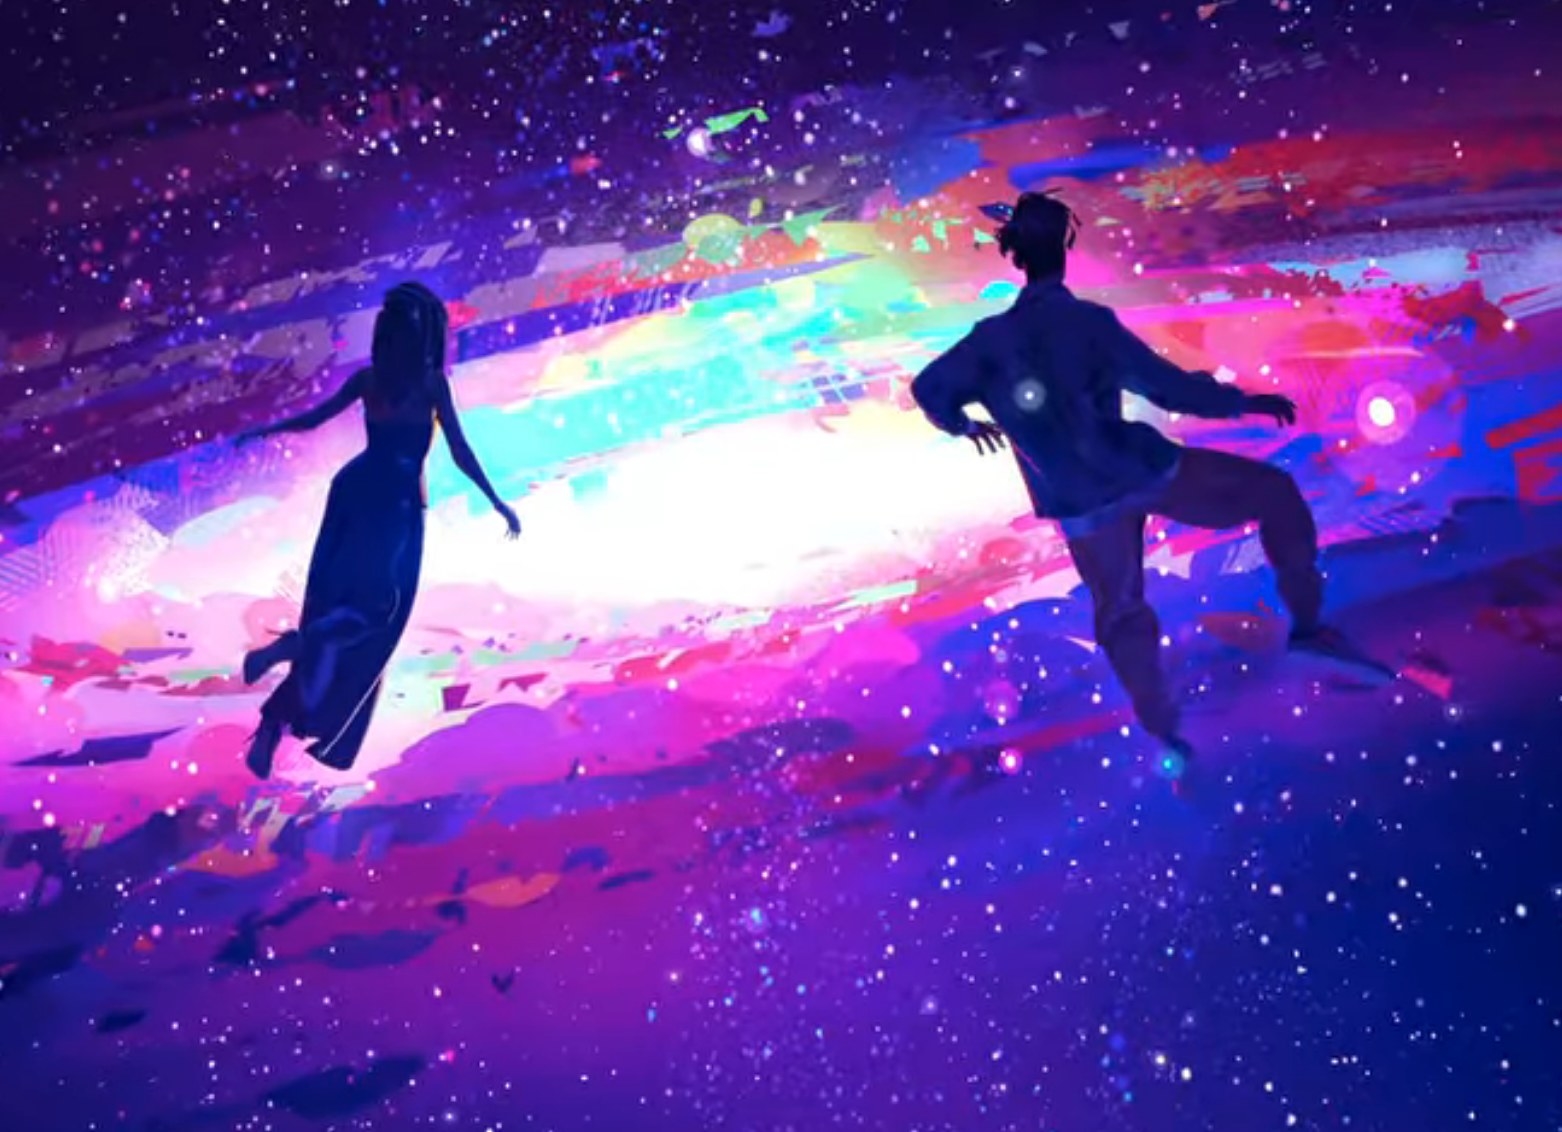 Meadow and Jabari float in a colorful celestial setting in &quot;Entergalactic&quot;